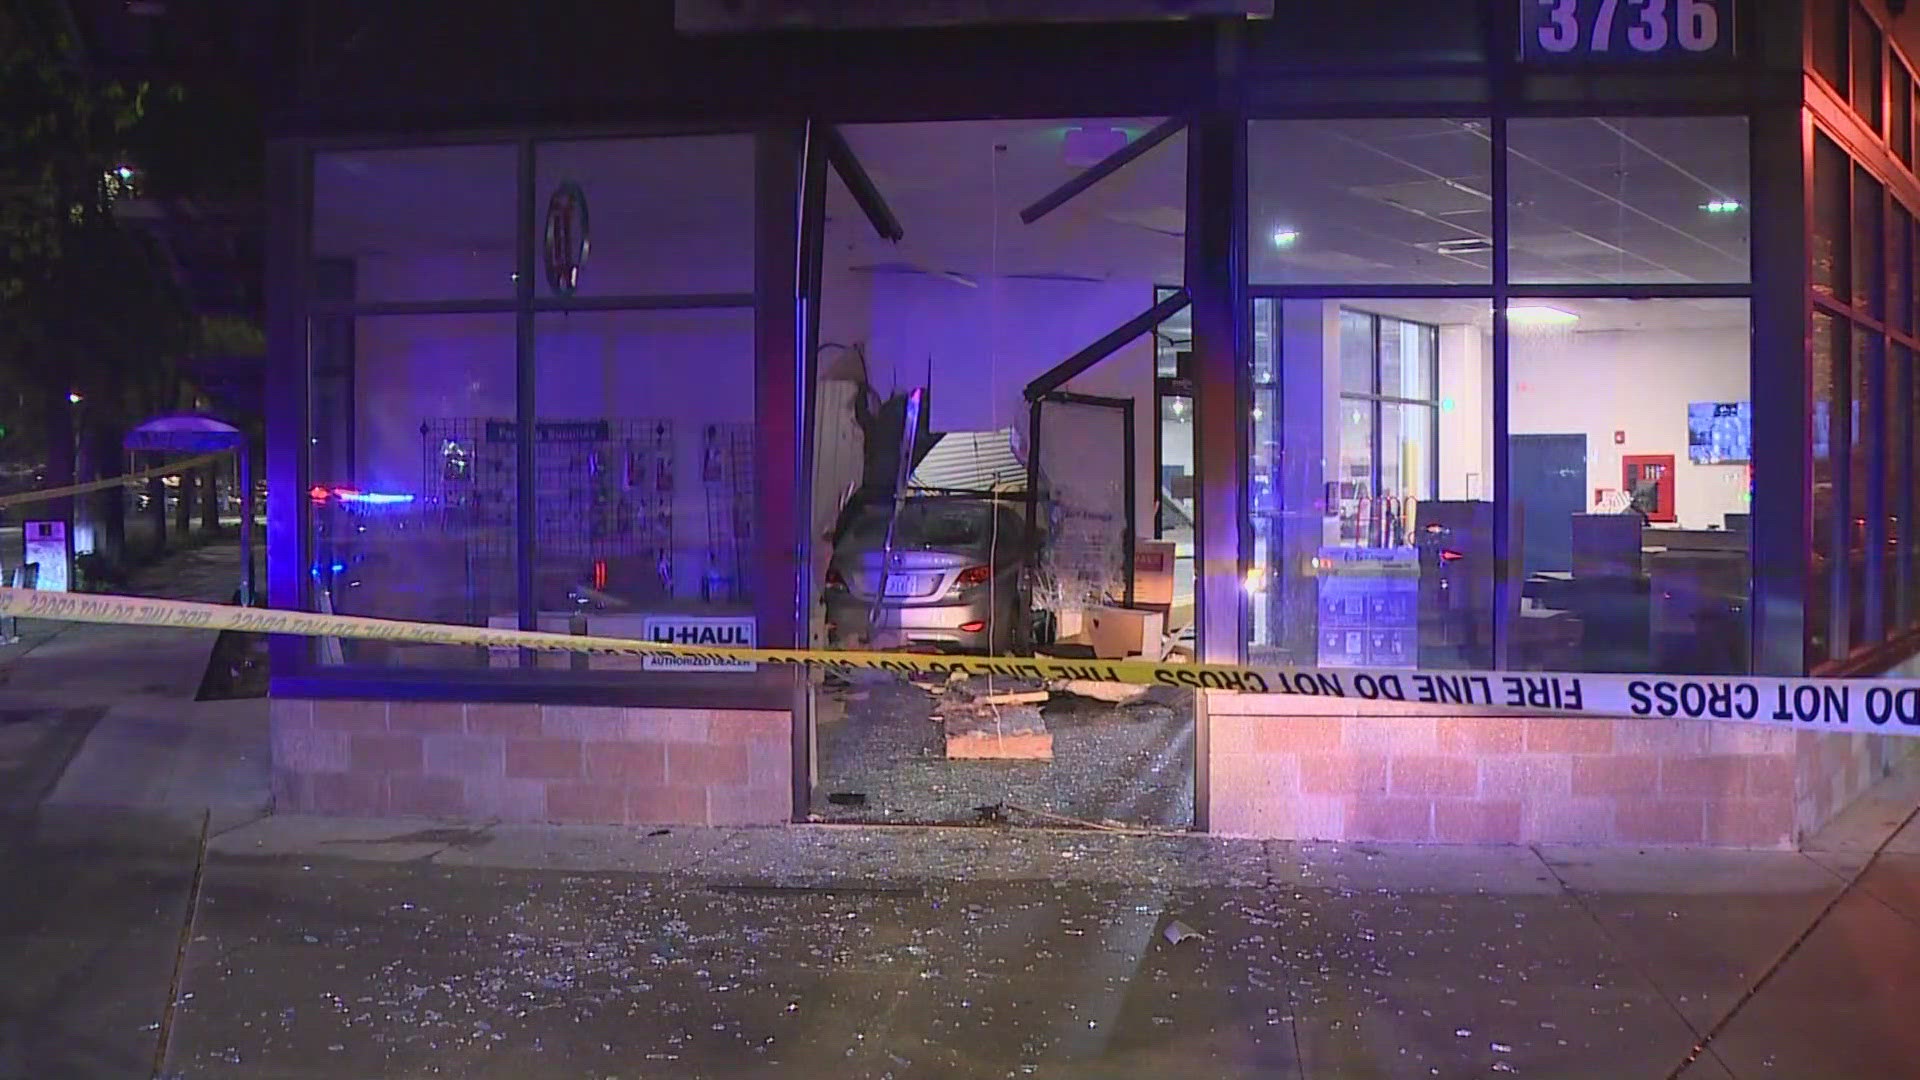 A 28-year-old driver was hospitalized after crashing into West Coast Self Storage near 33rd and Rainier Ave. in Seattle.